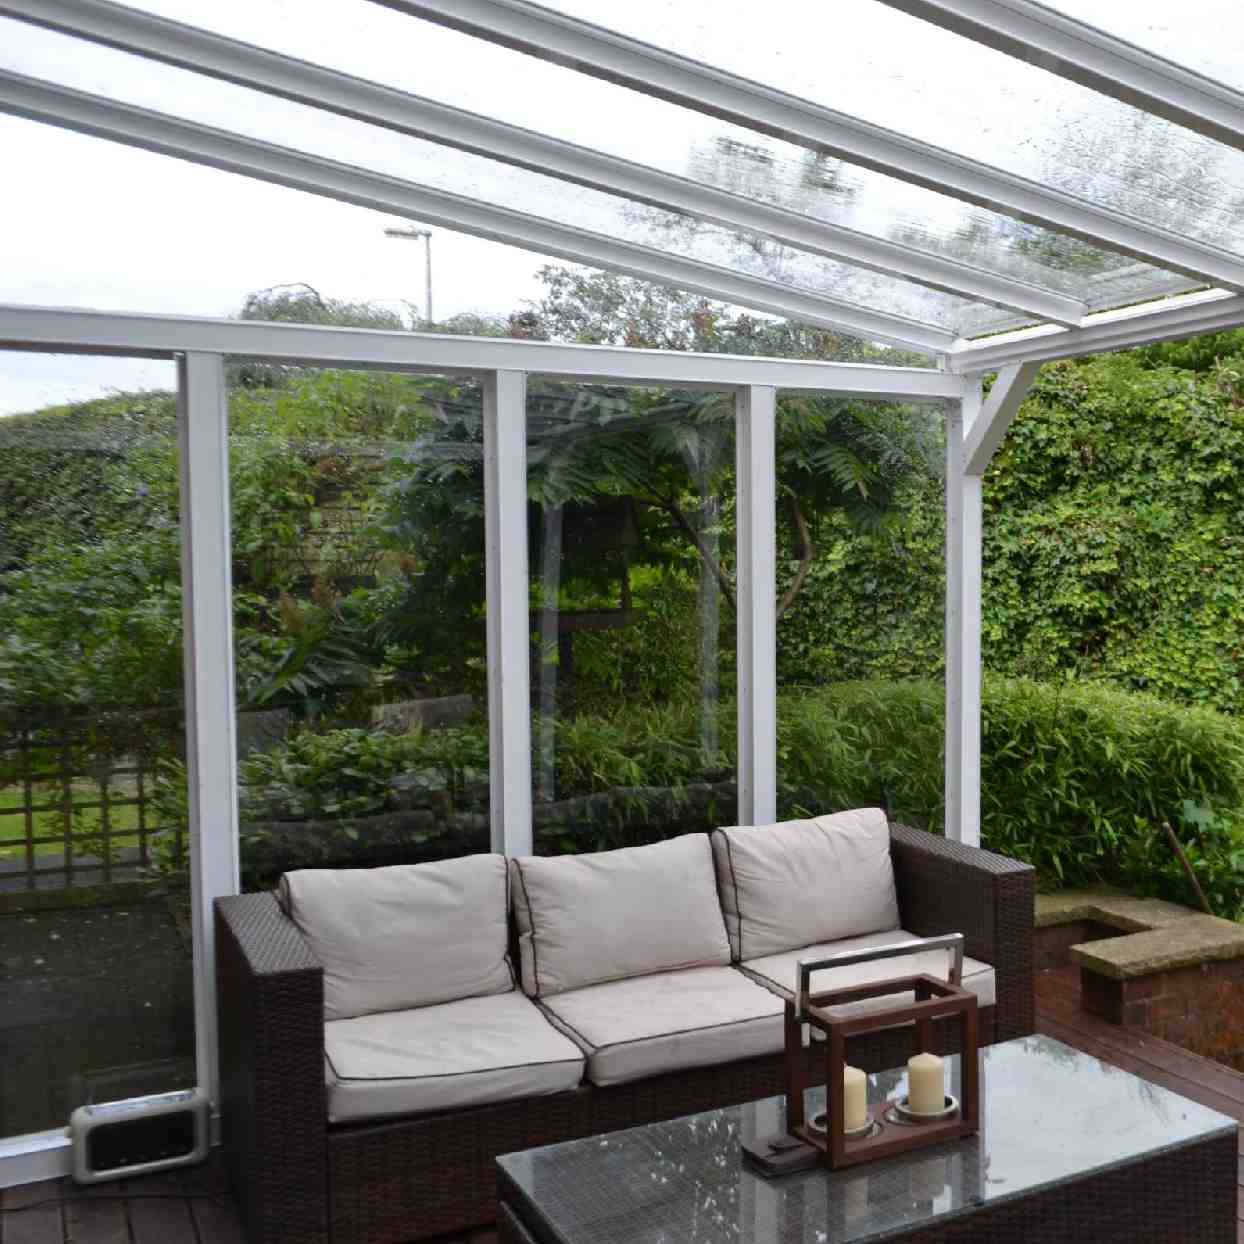 Buy Omega Verandah White with 6mm Glass Clear Plate Polycarbonate Glazing - 10.5m (W) x 3.5m (P), (5) Supporting Posts online today